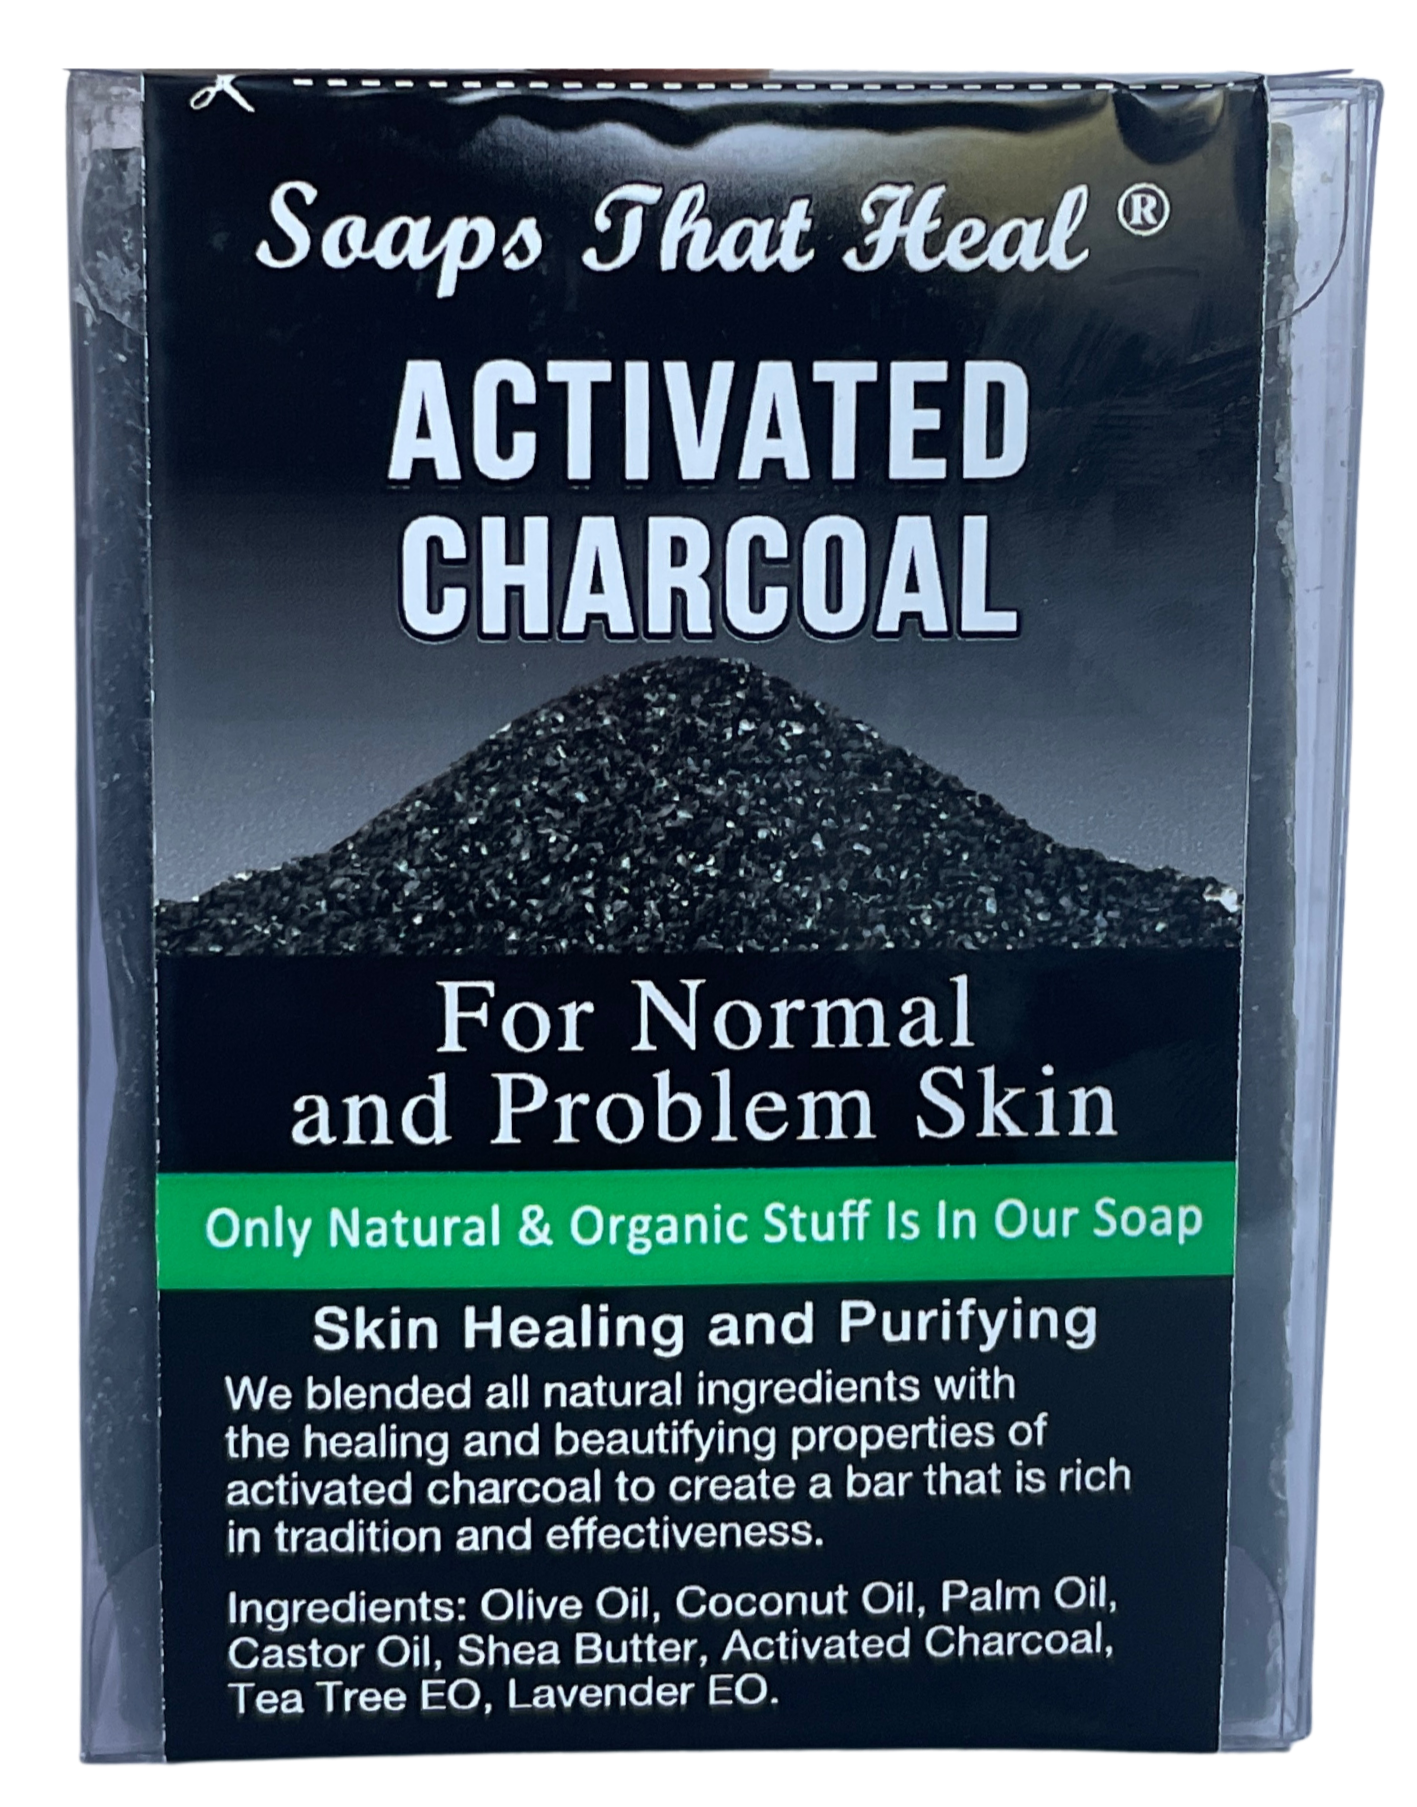 black charcoal soap,natural alternative to whitening creams, fade creams, bleaching creams, heal problem skin,Turmeric Soap,the best body soap,saje,soaps that heal,healing soap, how to get rid of dark marks,dark spots,whitening soaps,lightening soaps,hyperpigmentation, best turmeric soap,activated charcoal soap,skin healing,purifying,vegan free,chemical free,plant-based,natural oils,for problem skin,handcrafted,cold press,soaps